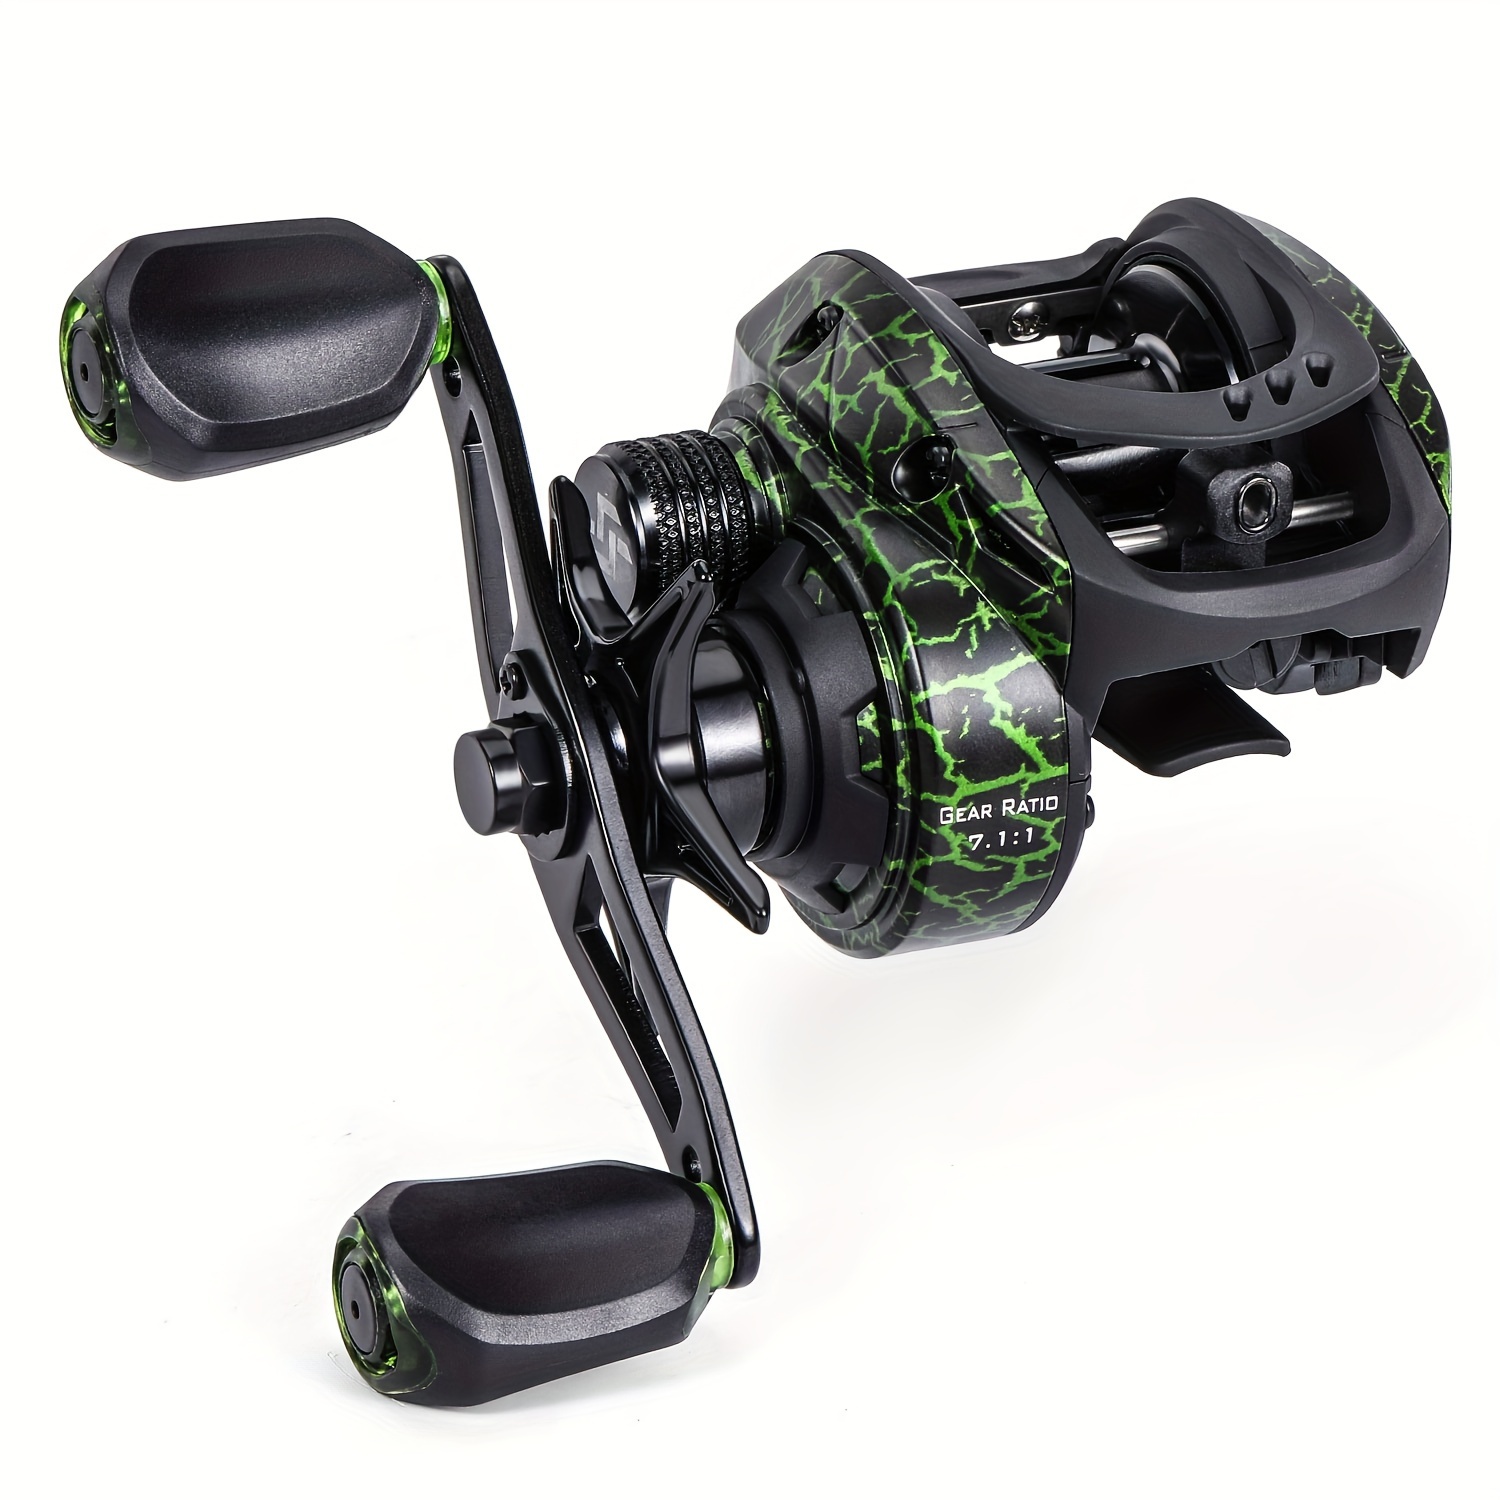 9+1BB Speed Ratio Fishing Reel with Dual Brake System Smooth